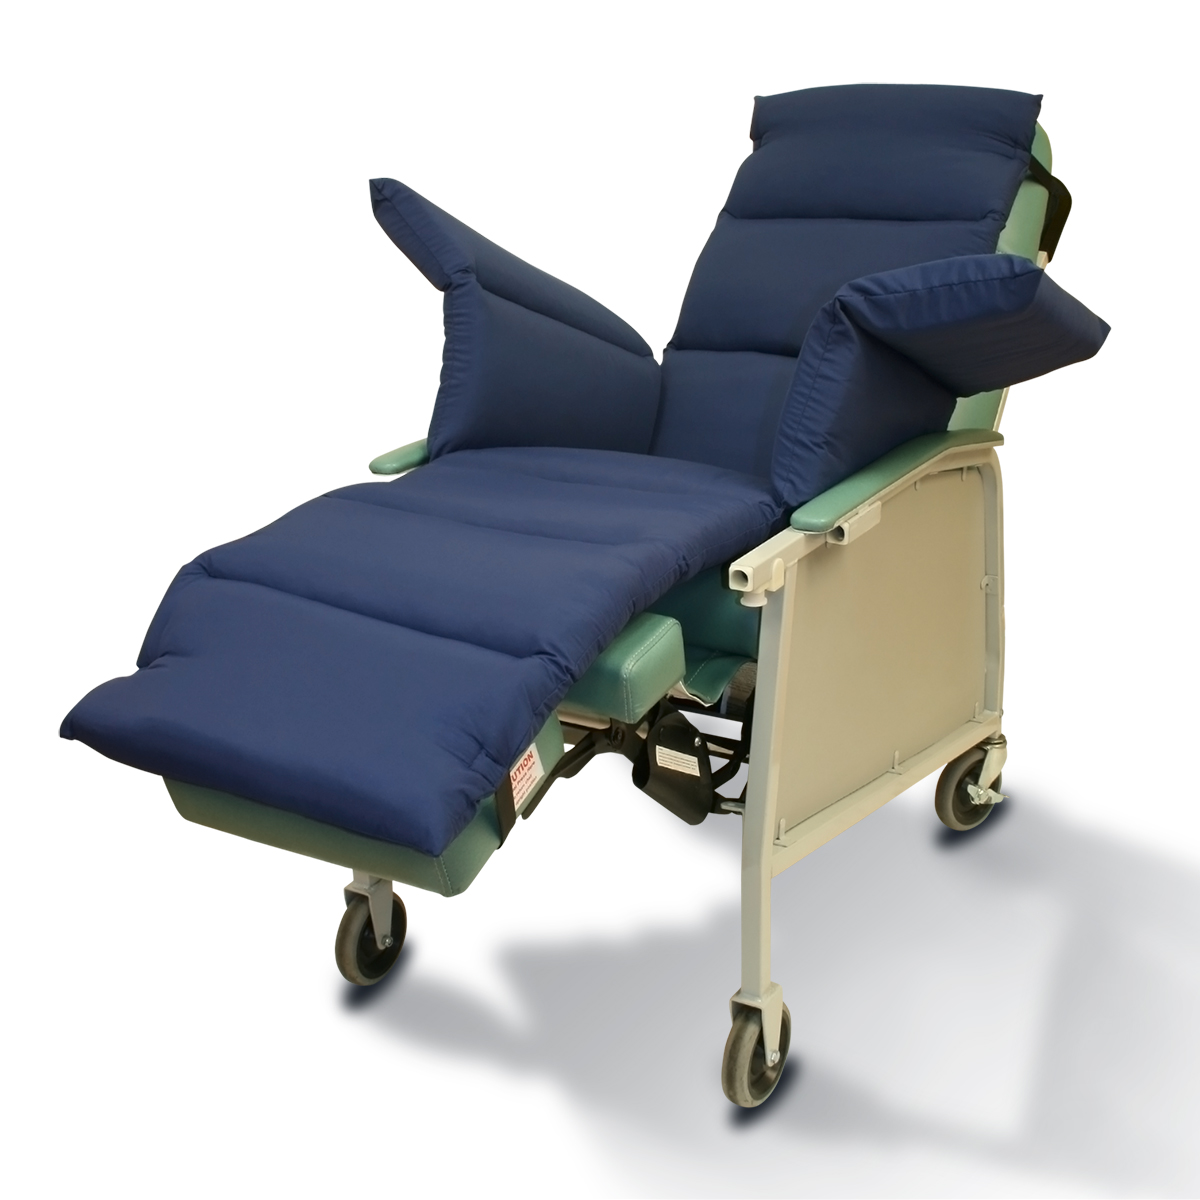 Geo-Wave Specialty Recliner Cushion